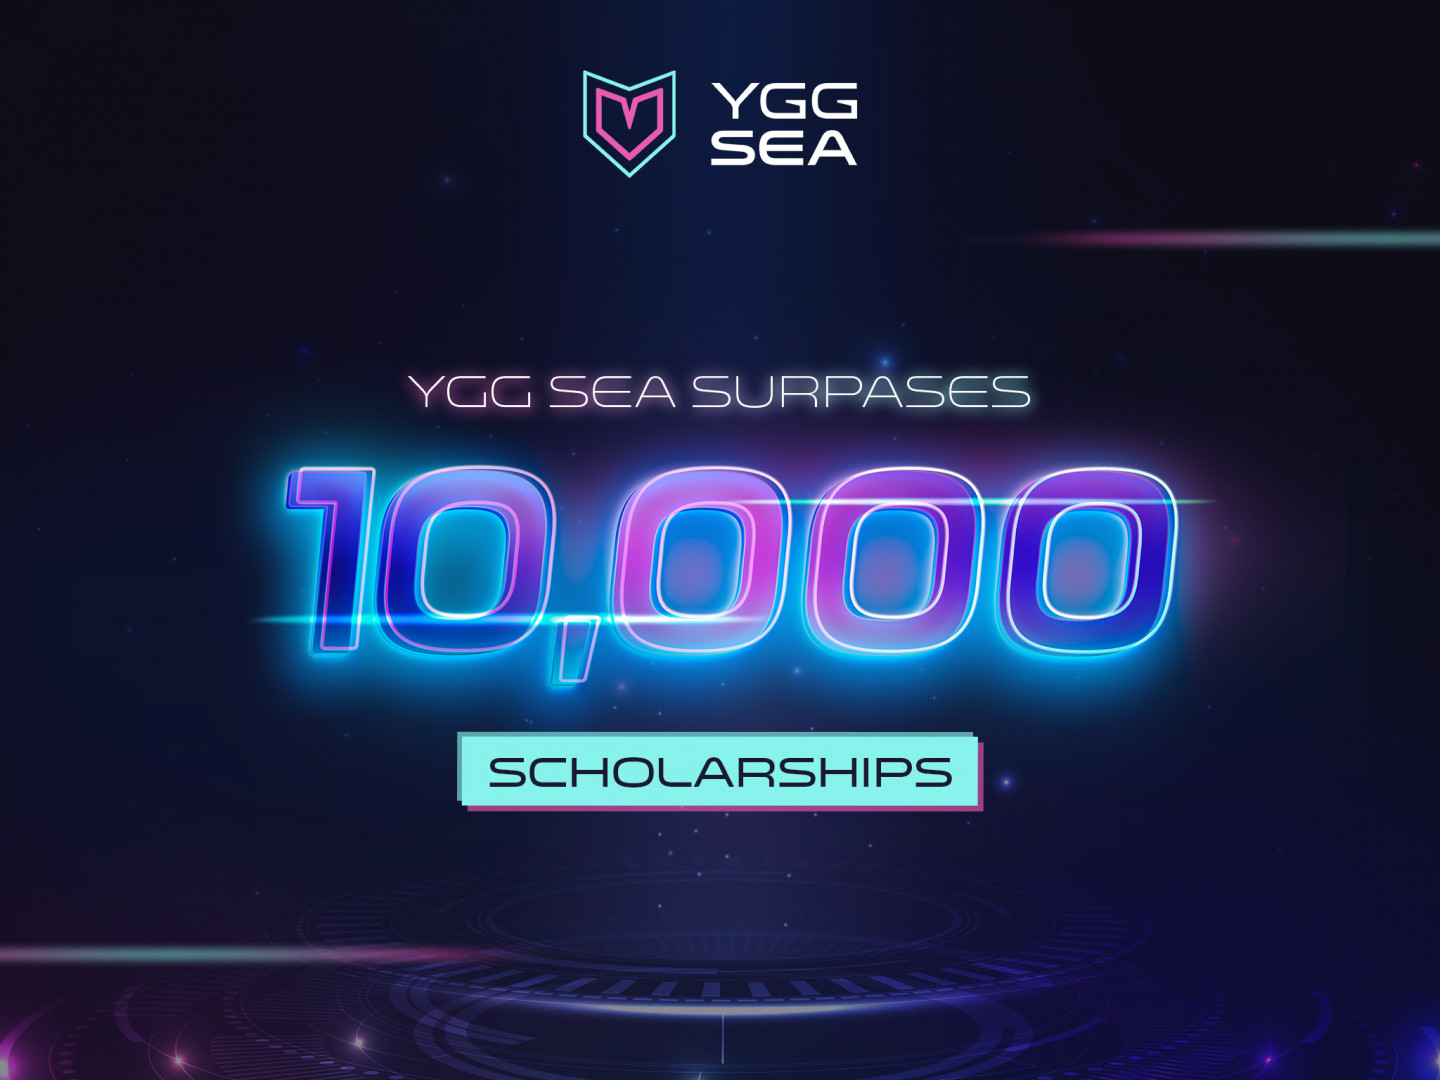 YGG SEA Surpasses 10,000 Scholarships in Just Six Months of Launch – CoinCheckup Blog